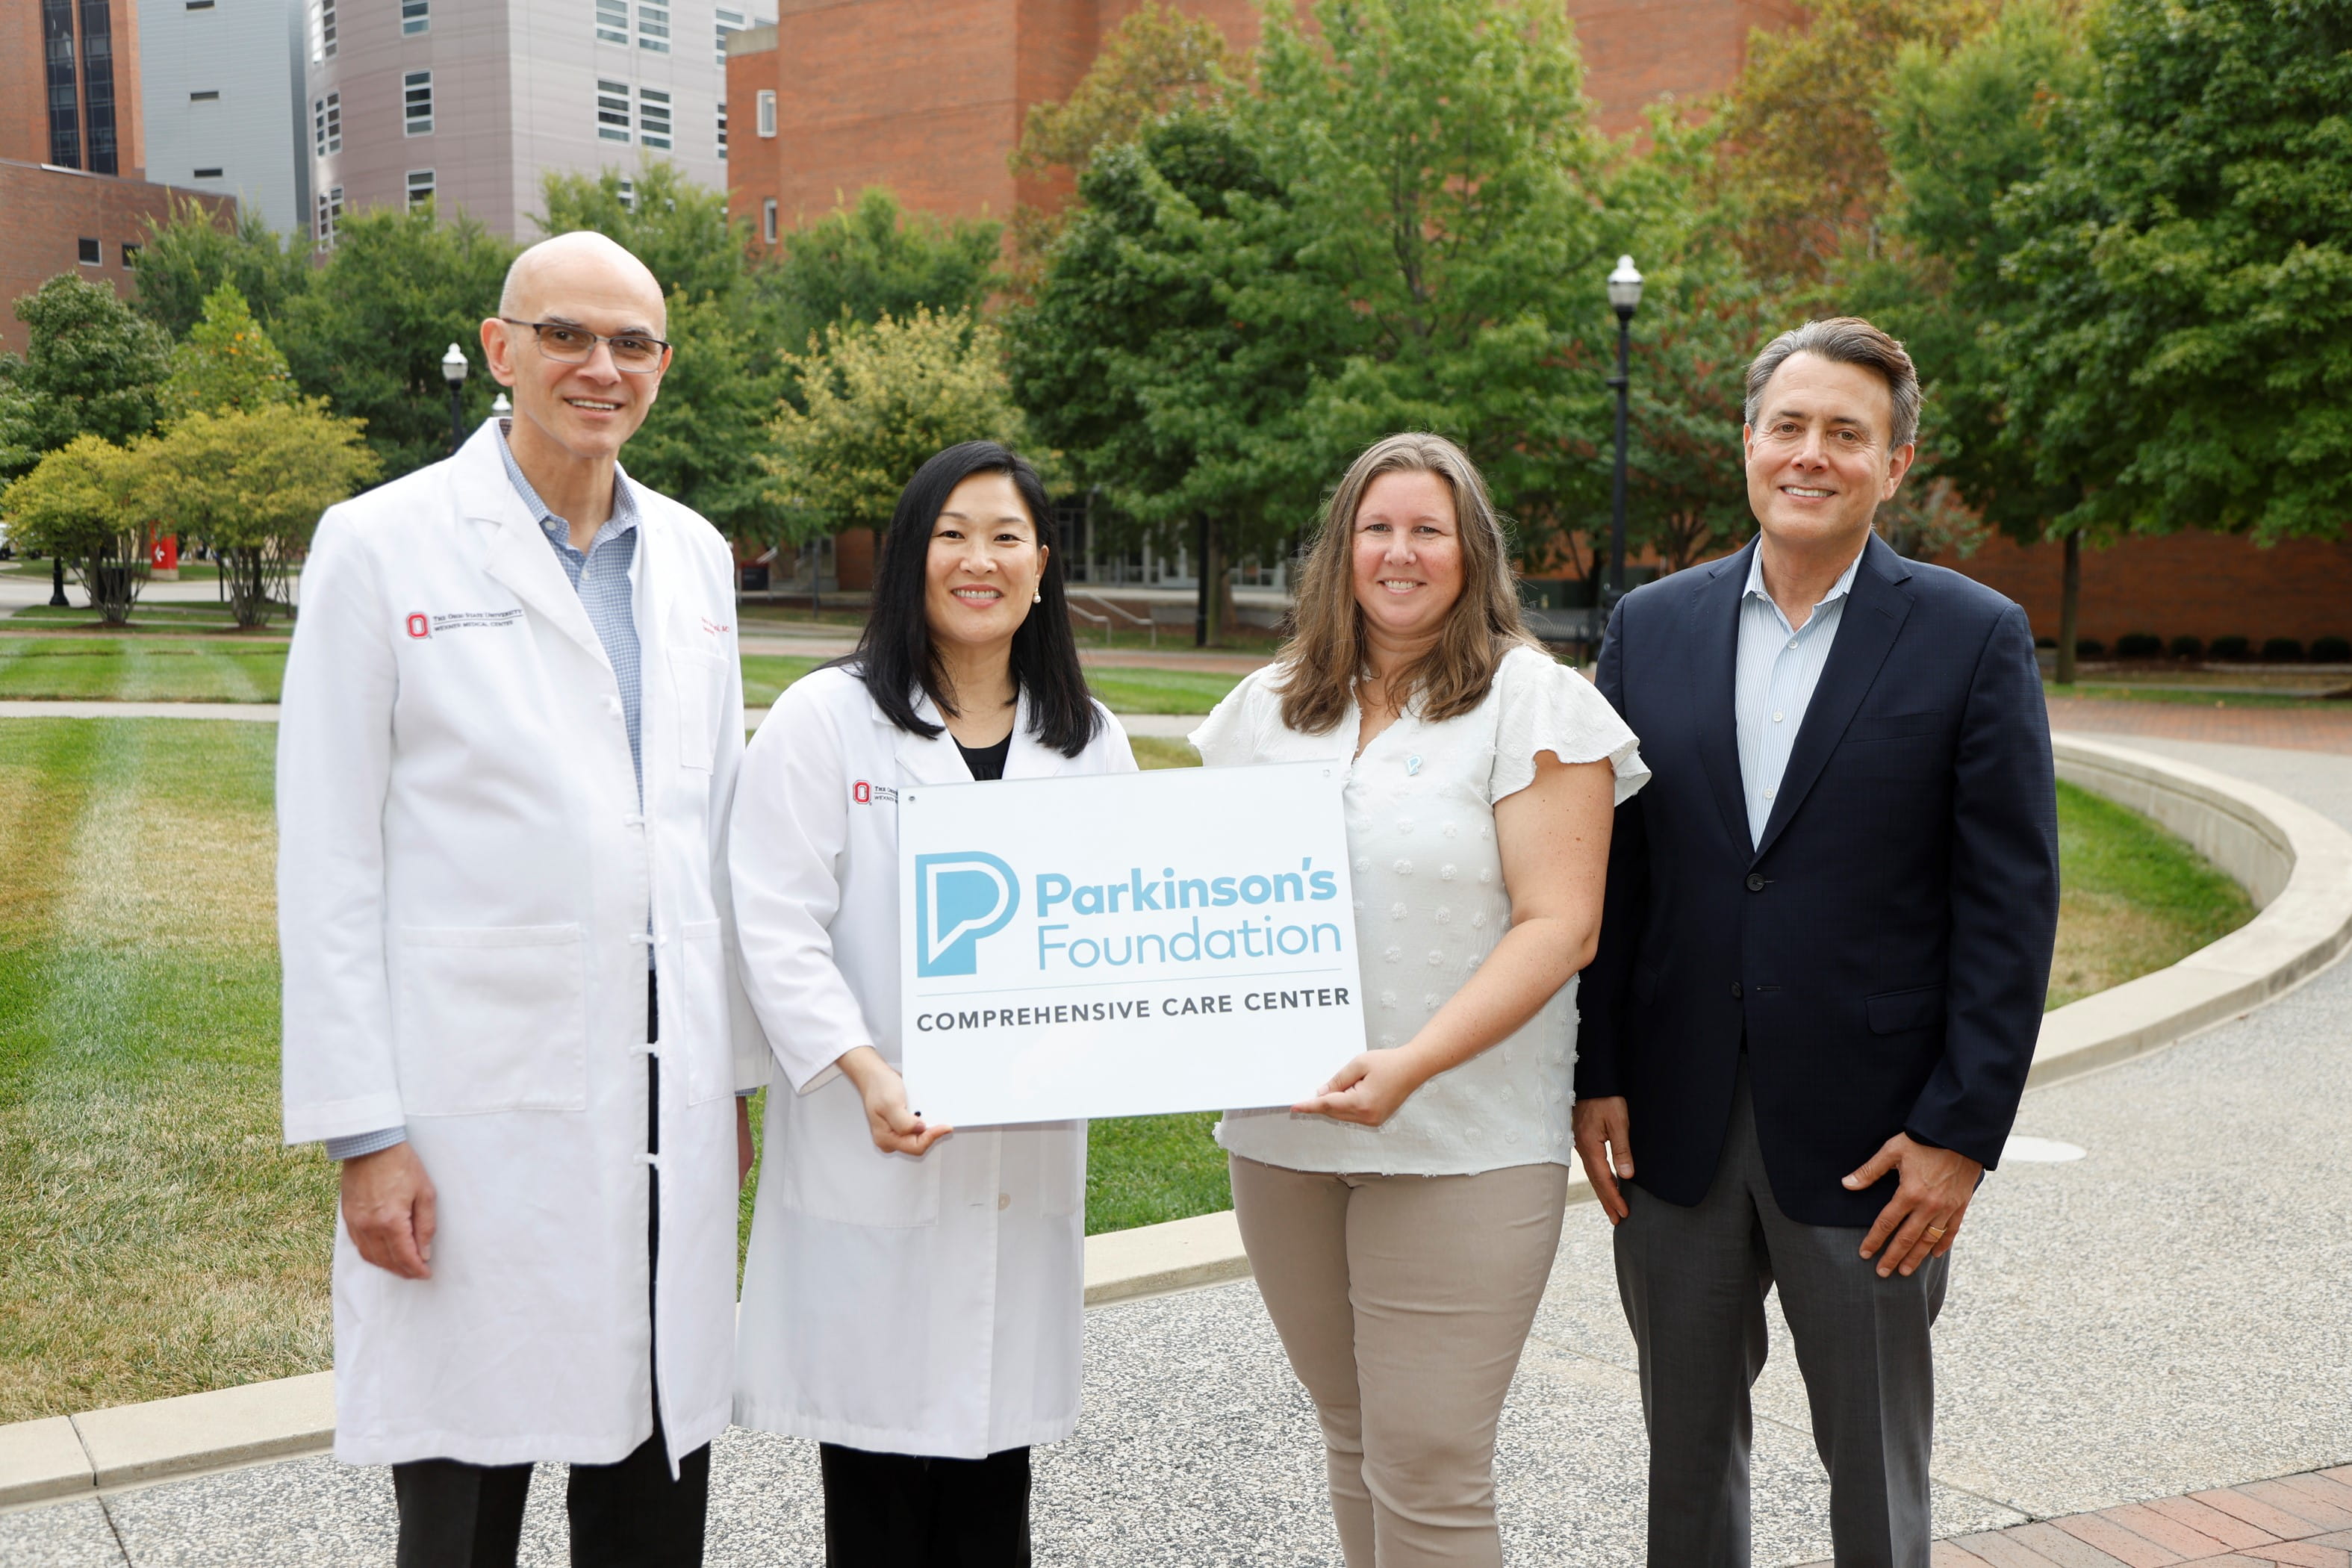 Caption for the photo: (left to right): Pietro Mazzoni, MD, co-director of Division of Parkinson’s Disease and Other Movement Disorders; Ariane Park, MD, co-director of Division of Parkinson’s Disease and Other Movement Disorders; Laura Summers, Community Program Manager, Parkinson's Foundation; Benjamin Segal, MD, chair of the Department of Neurology and Co-director of the Neurological Institute. 